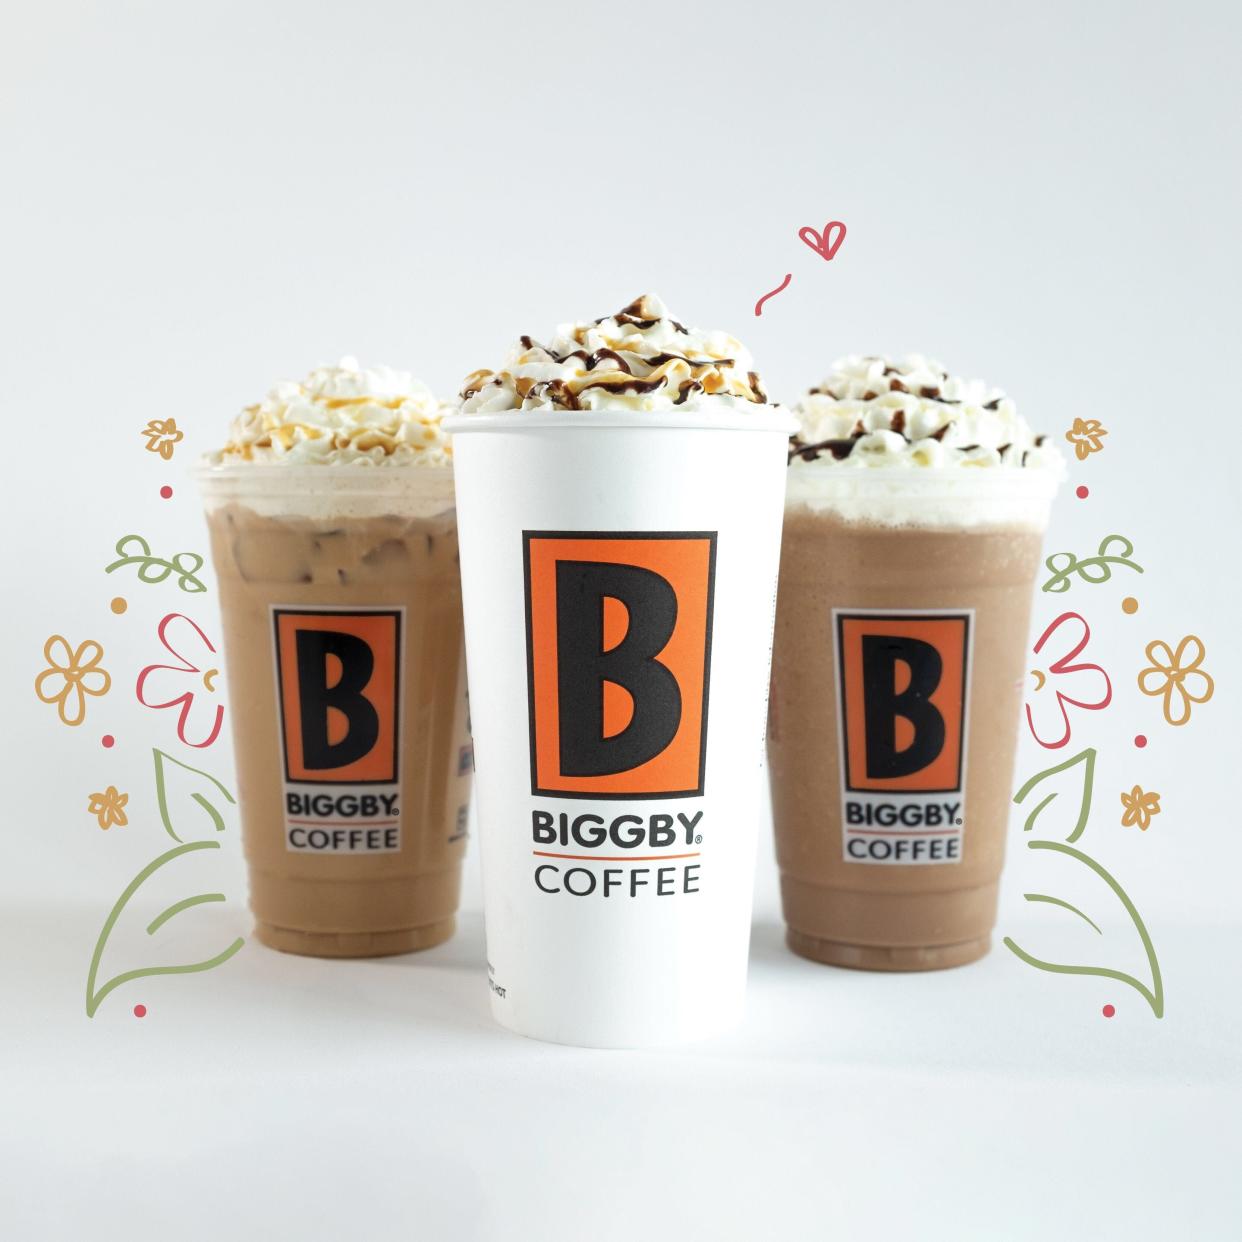 Biggby Coffee has a free offer for veterans on Veterans Day.